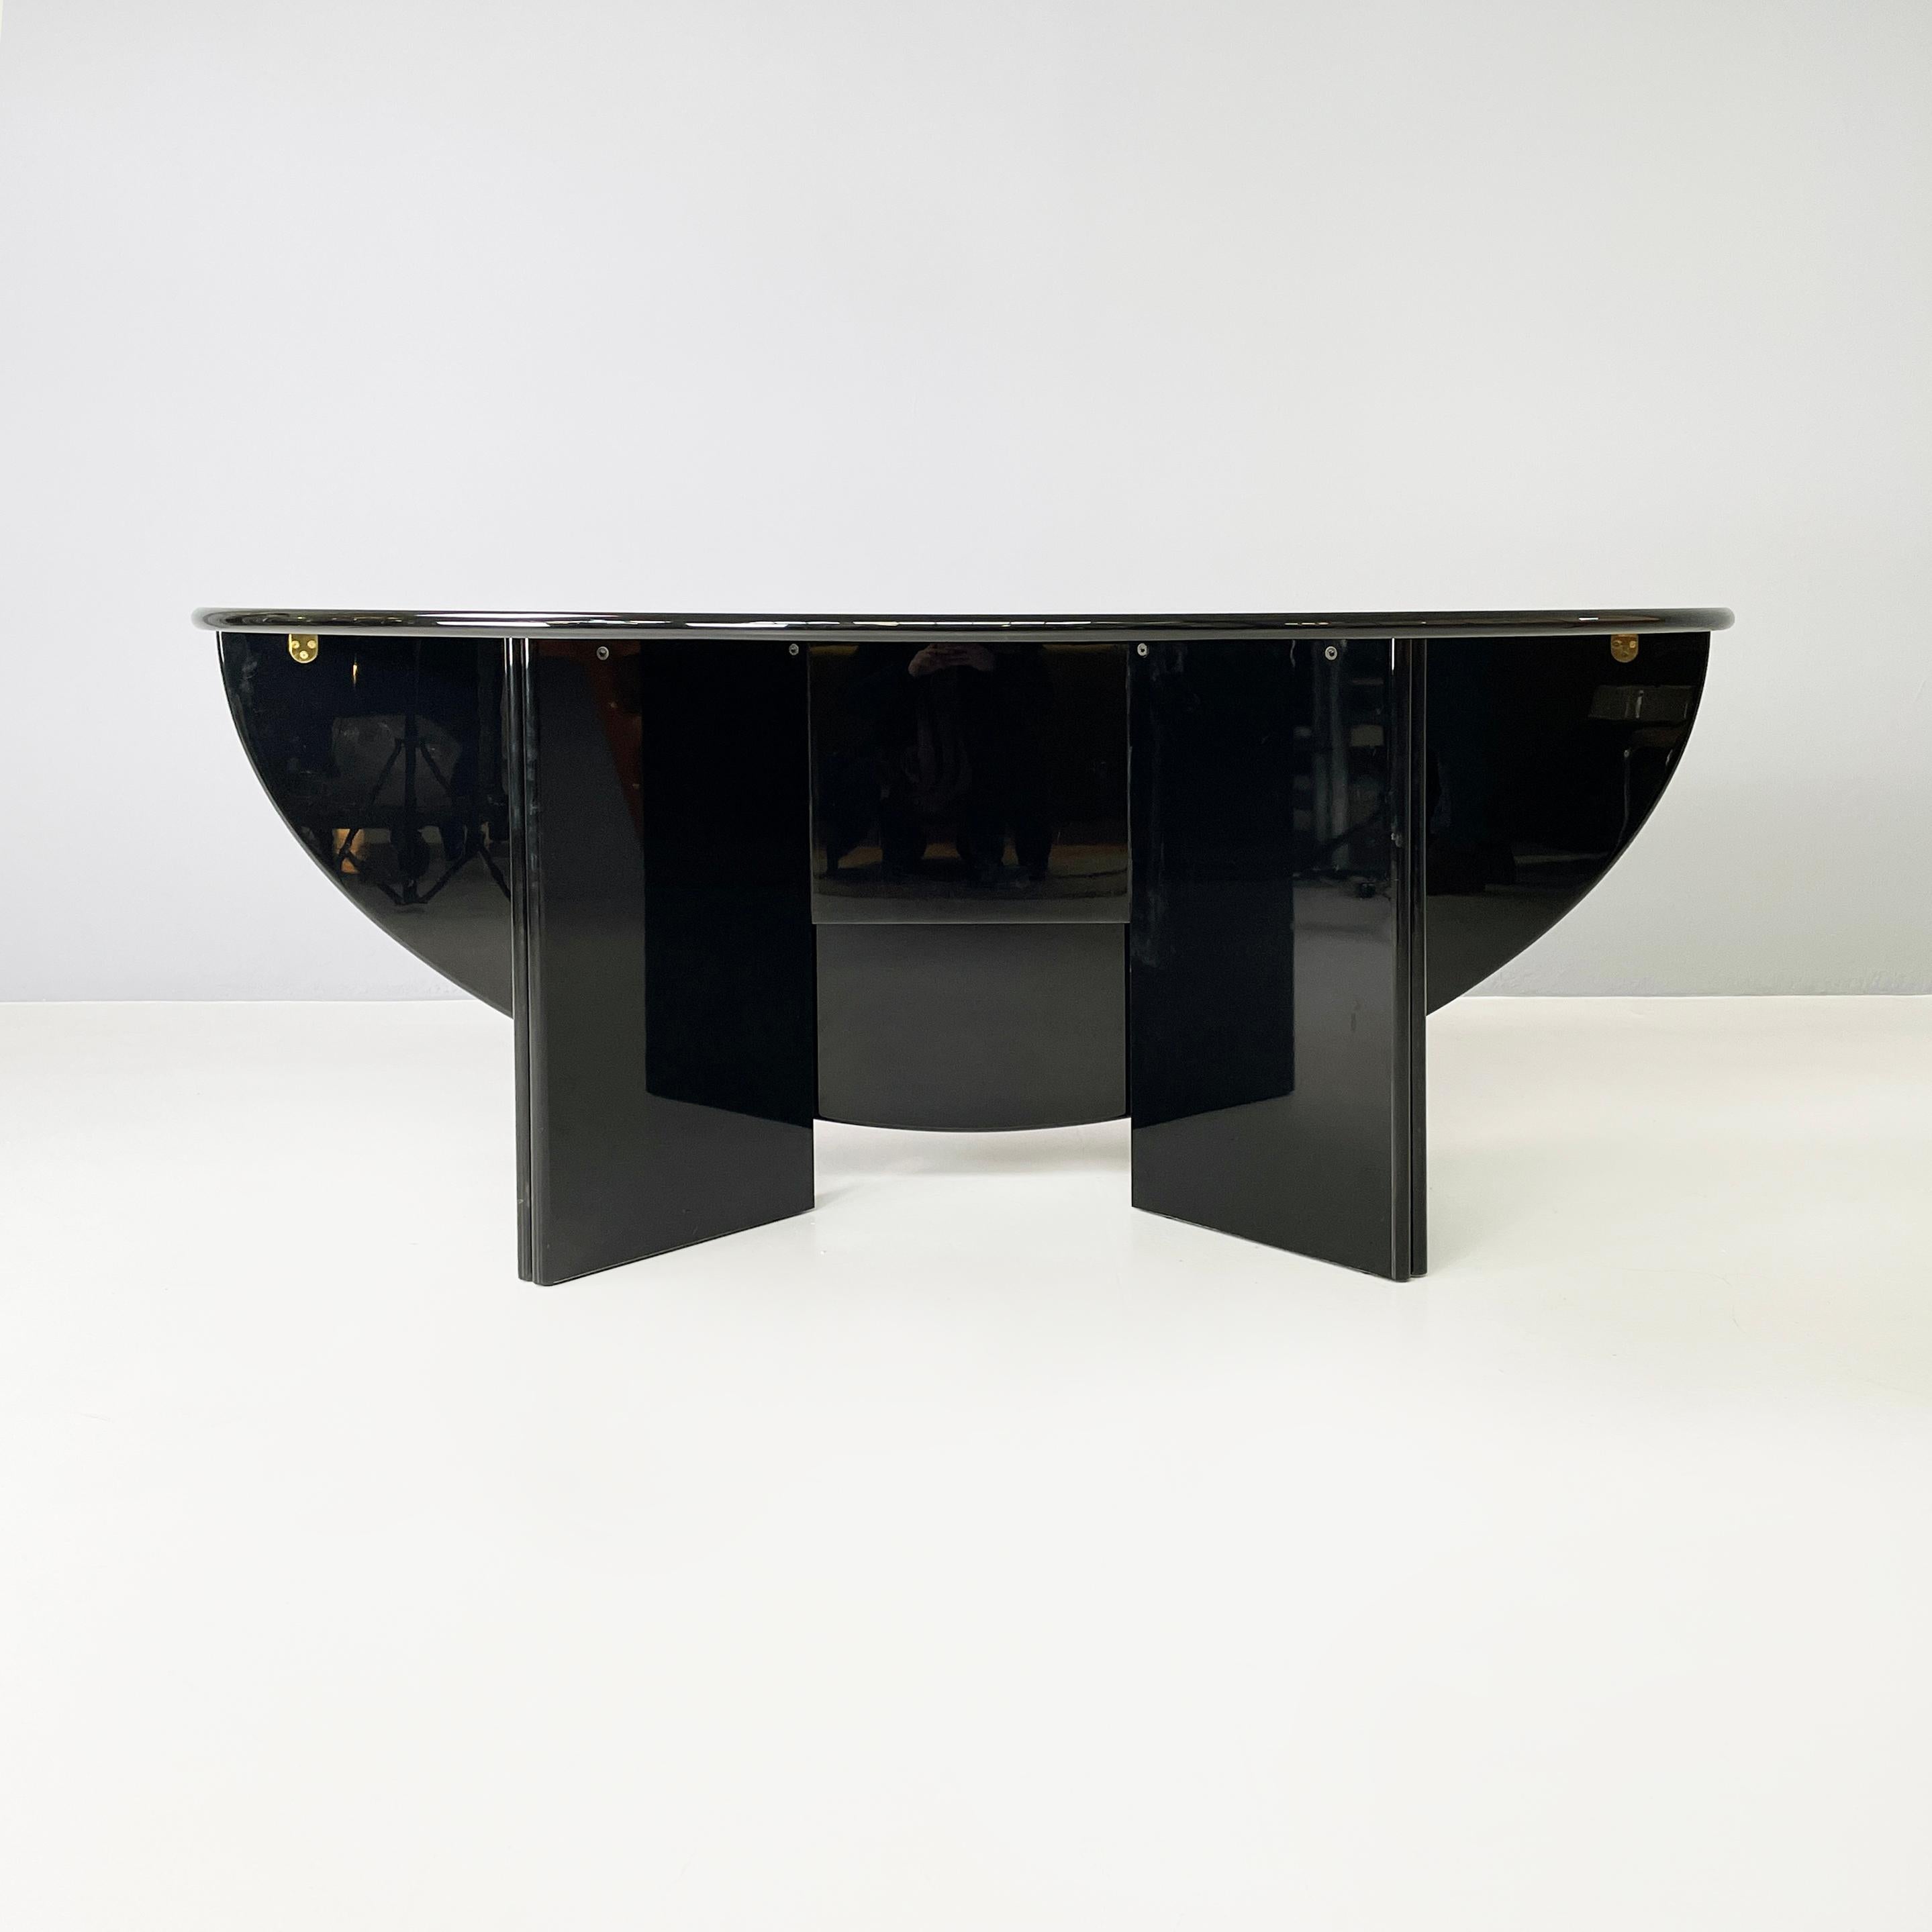 Wood Italian modern Black Dining table or console by Takahama for Cassina, 1970s For Sale